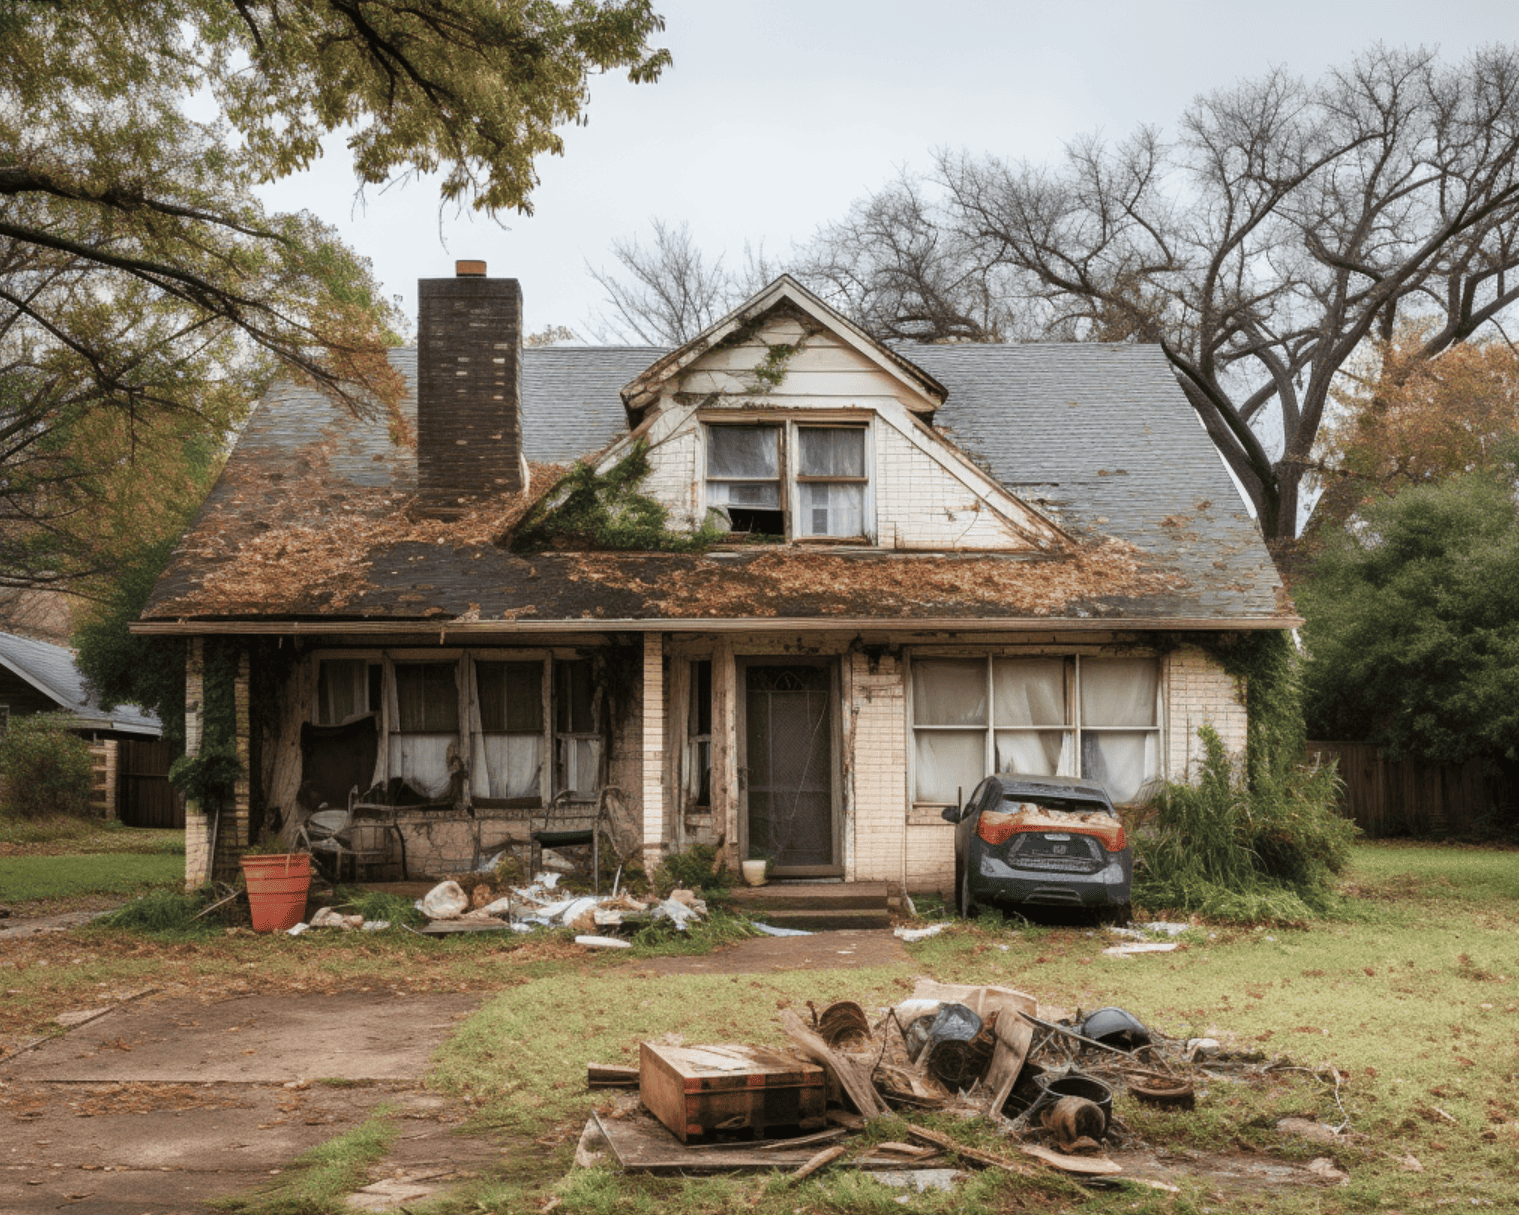 Squatters Rights DFW, Texas: A Complete Guide.